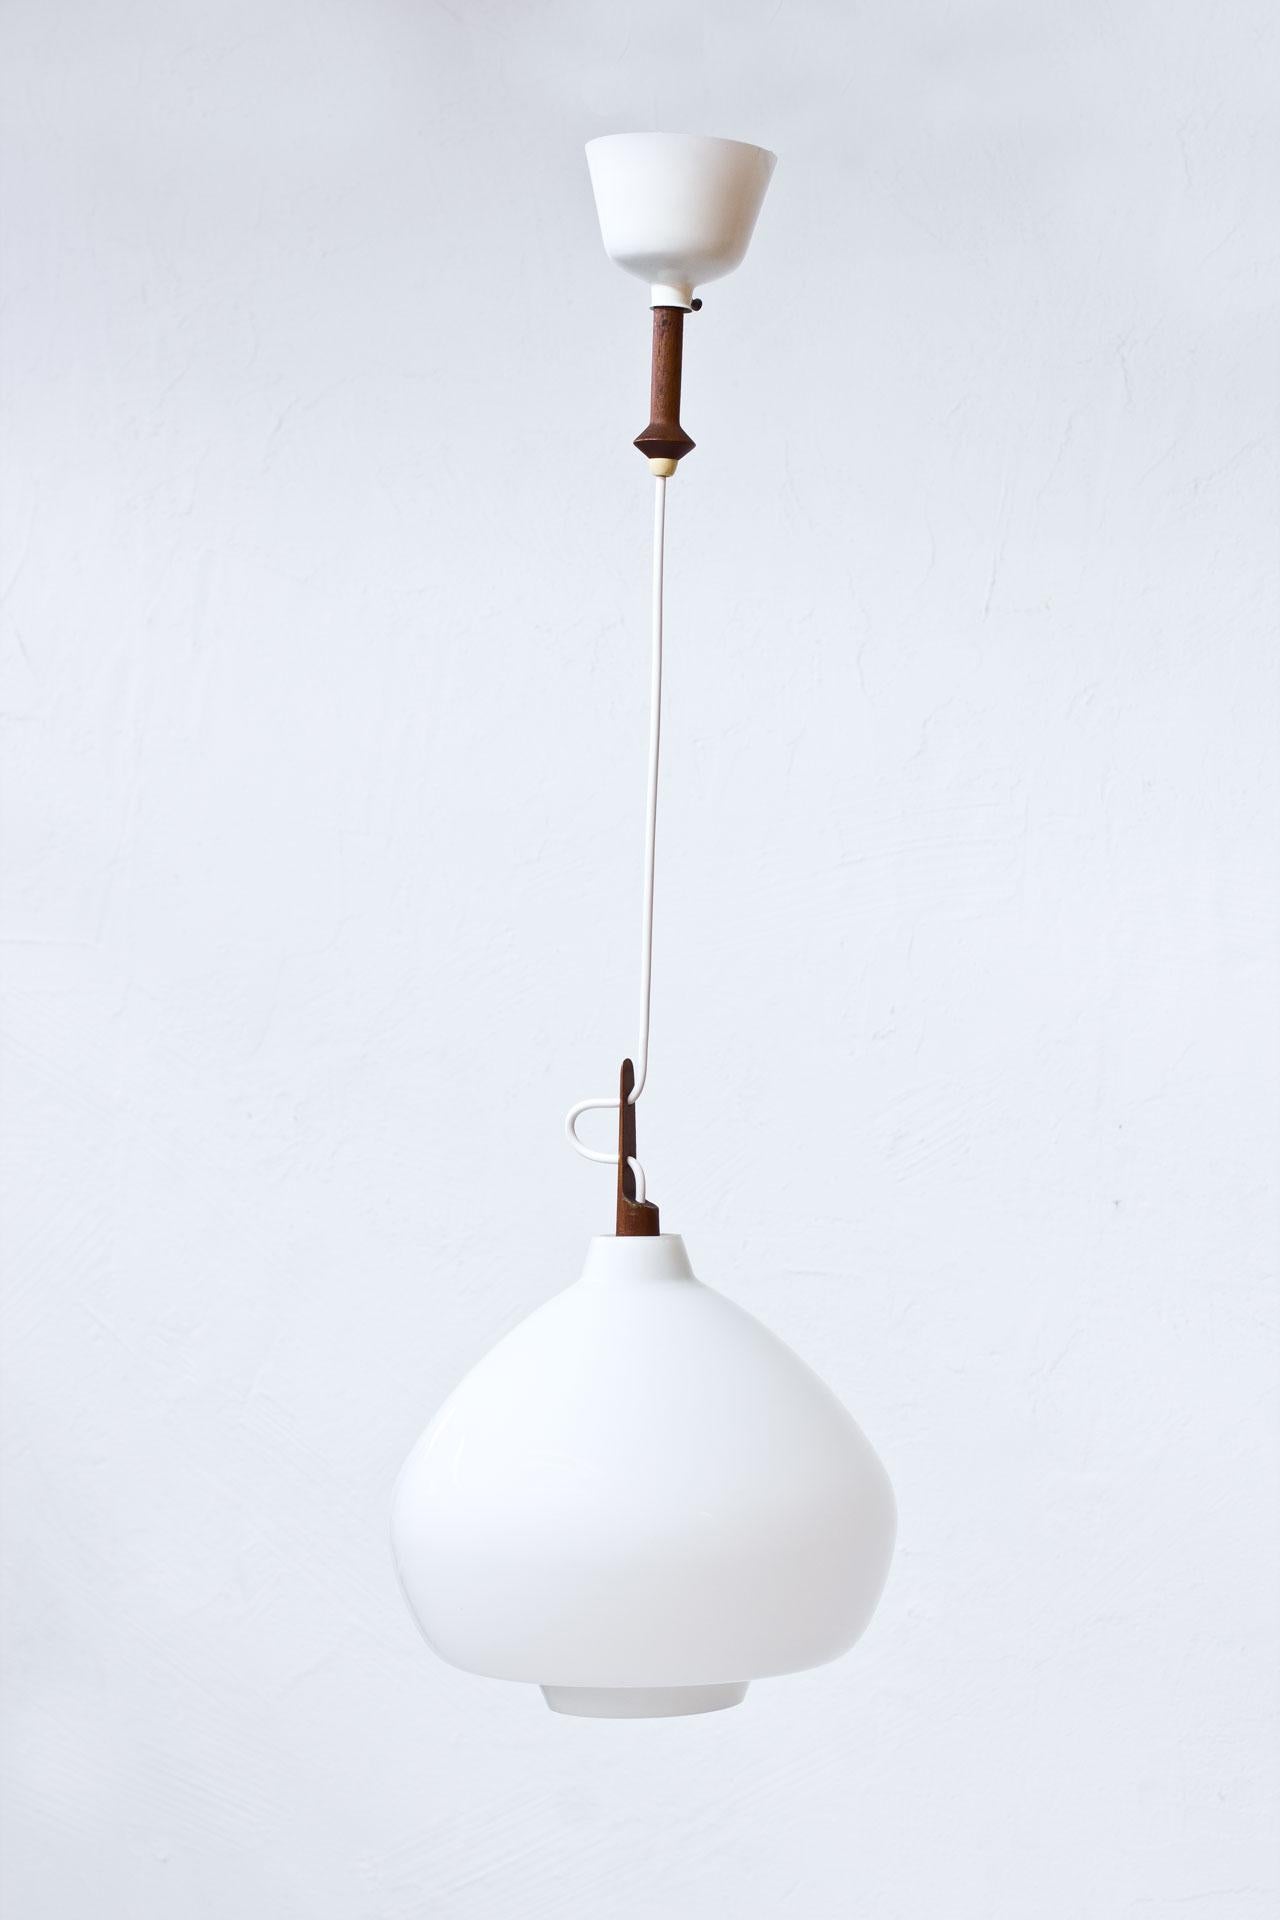 Pendant lamp designed by Hans-Agne Jakobsson. Manufactured by his own company at Markaryd, Sweden during the 1950s. Opaline glass with teak fittings. Original metal ceiling cup. New electricity.